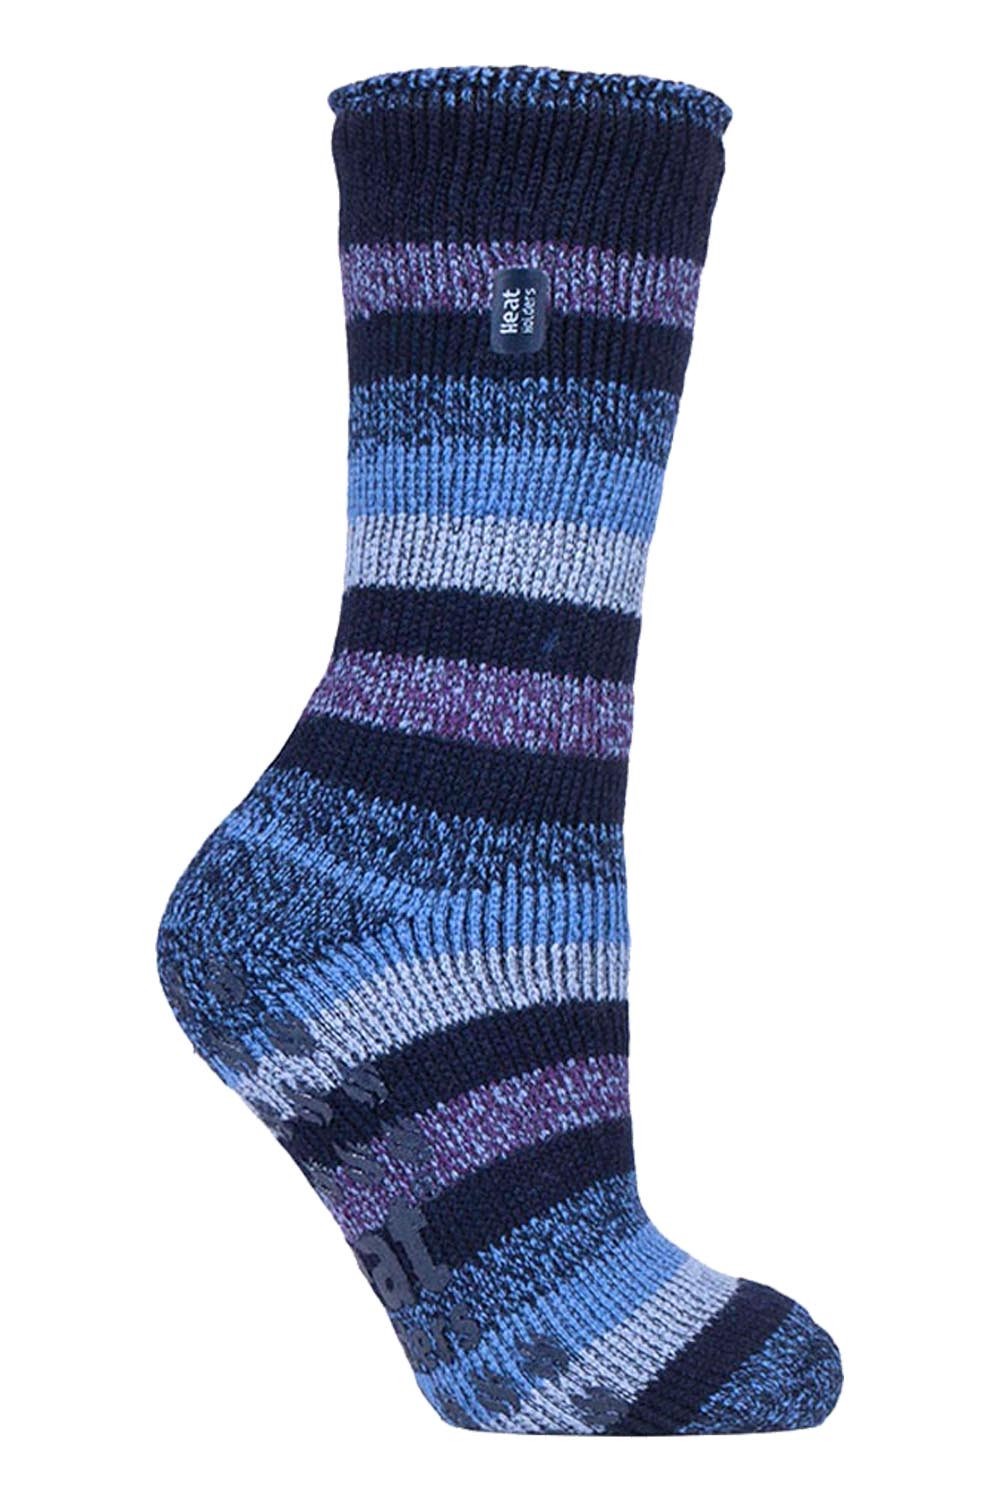 Womens Striped Thermal Socks With Grips -